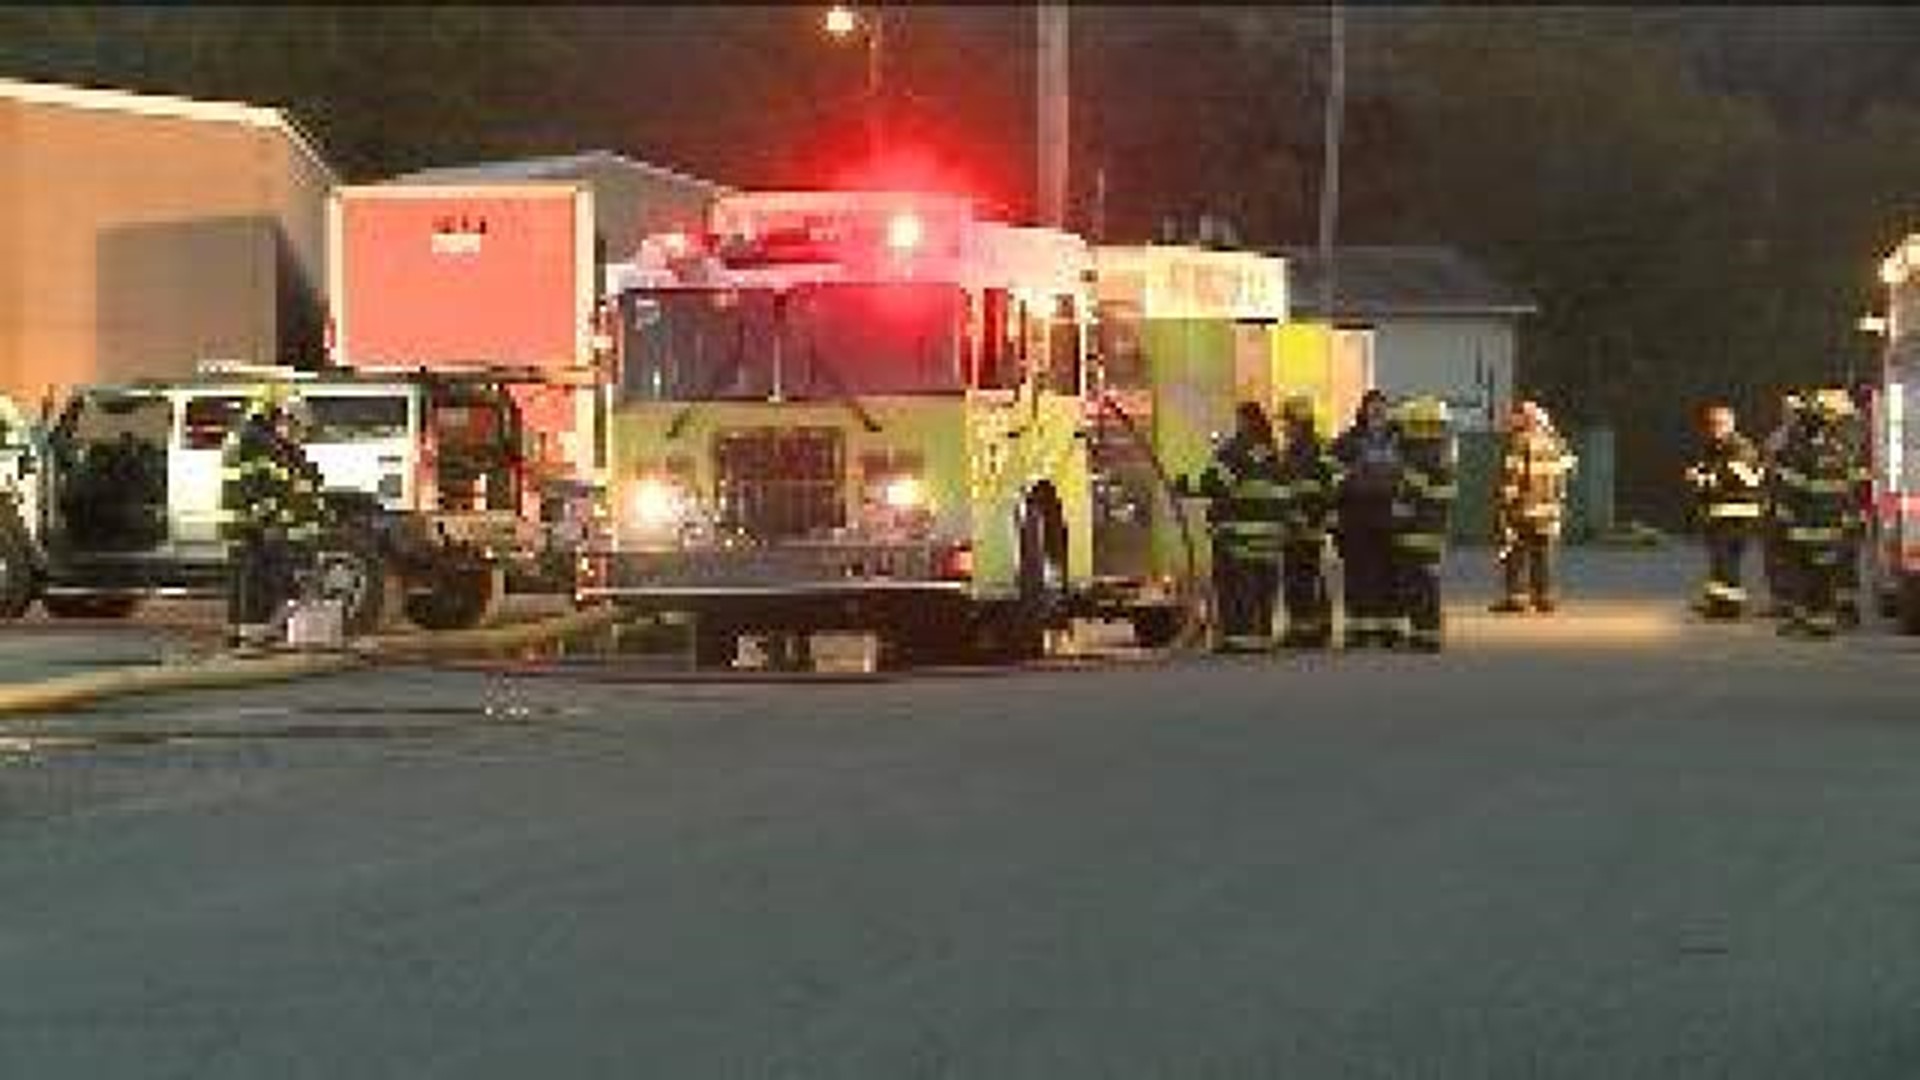 Fire in Wise Plant Ruled Accidental